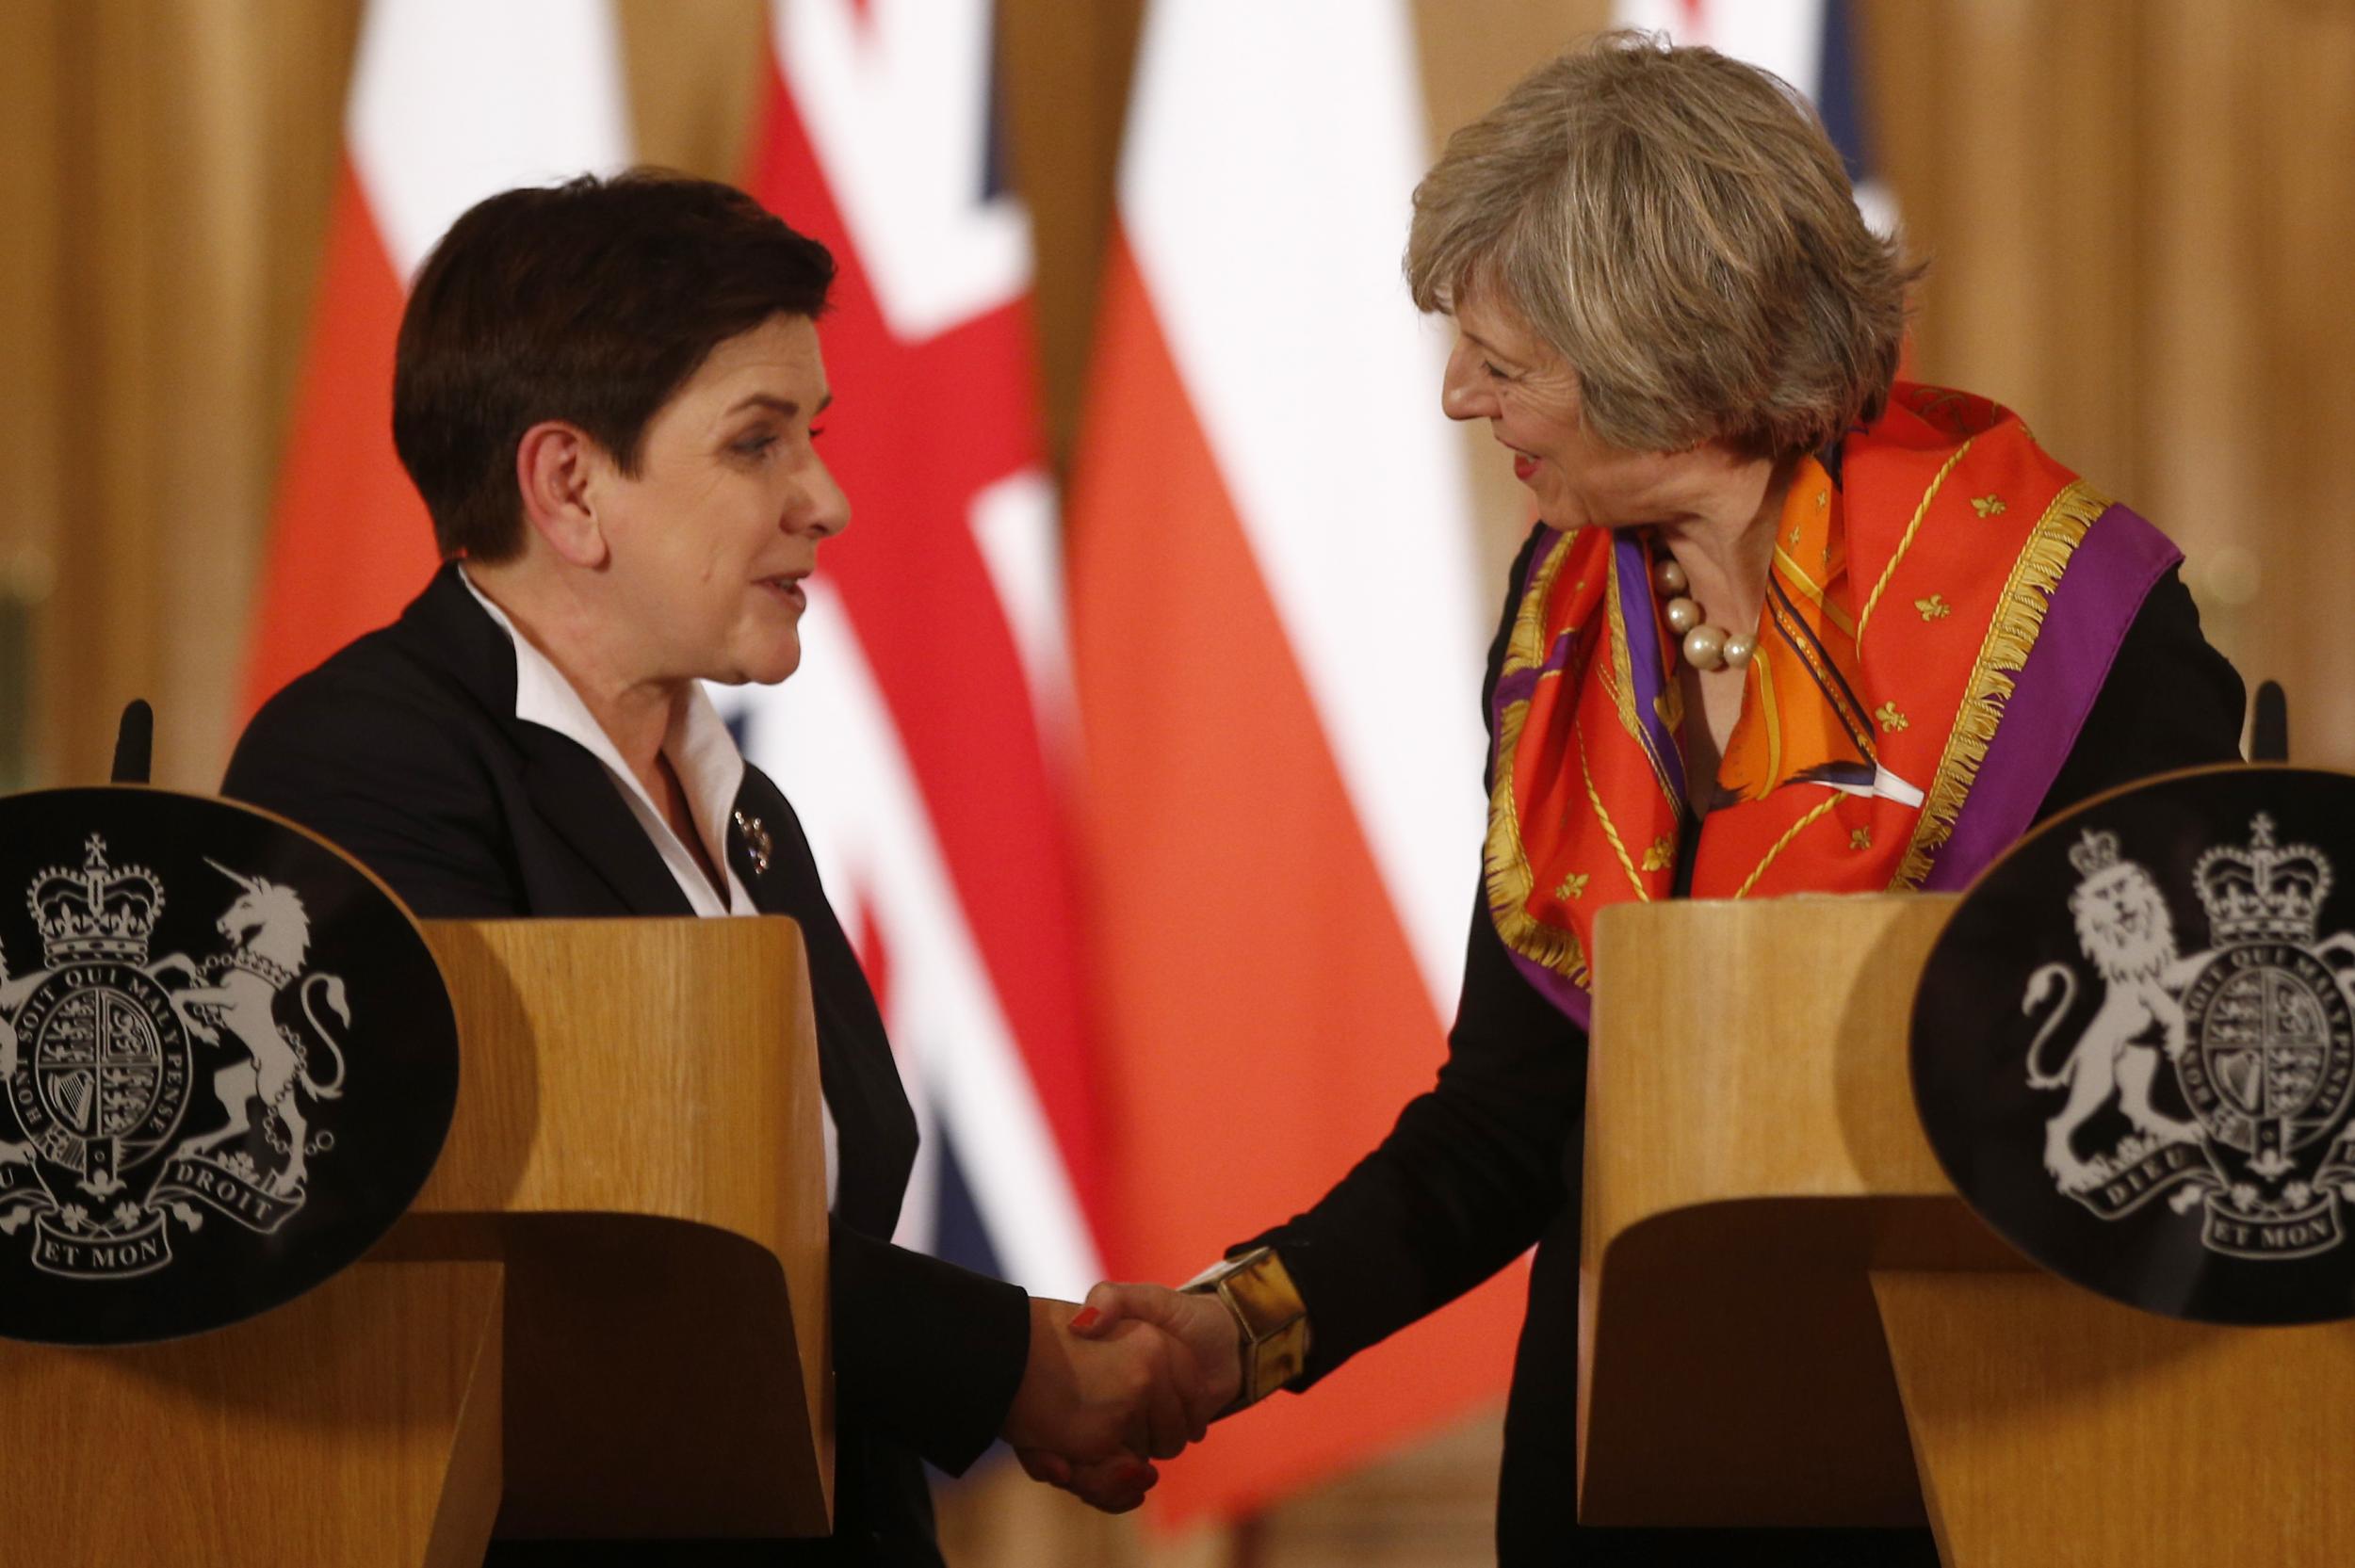 Britain's Prime Minister Theresa May (R) and her Polish counterpart Beata Szydlo hold a joint news conference in 10 Downing Street in central London, Britain November 28, 2016